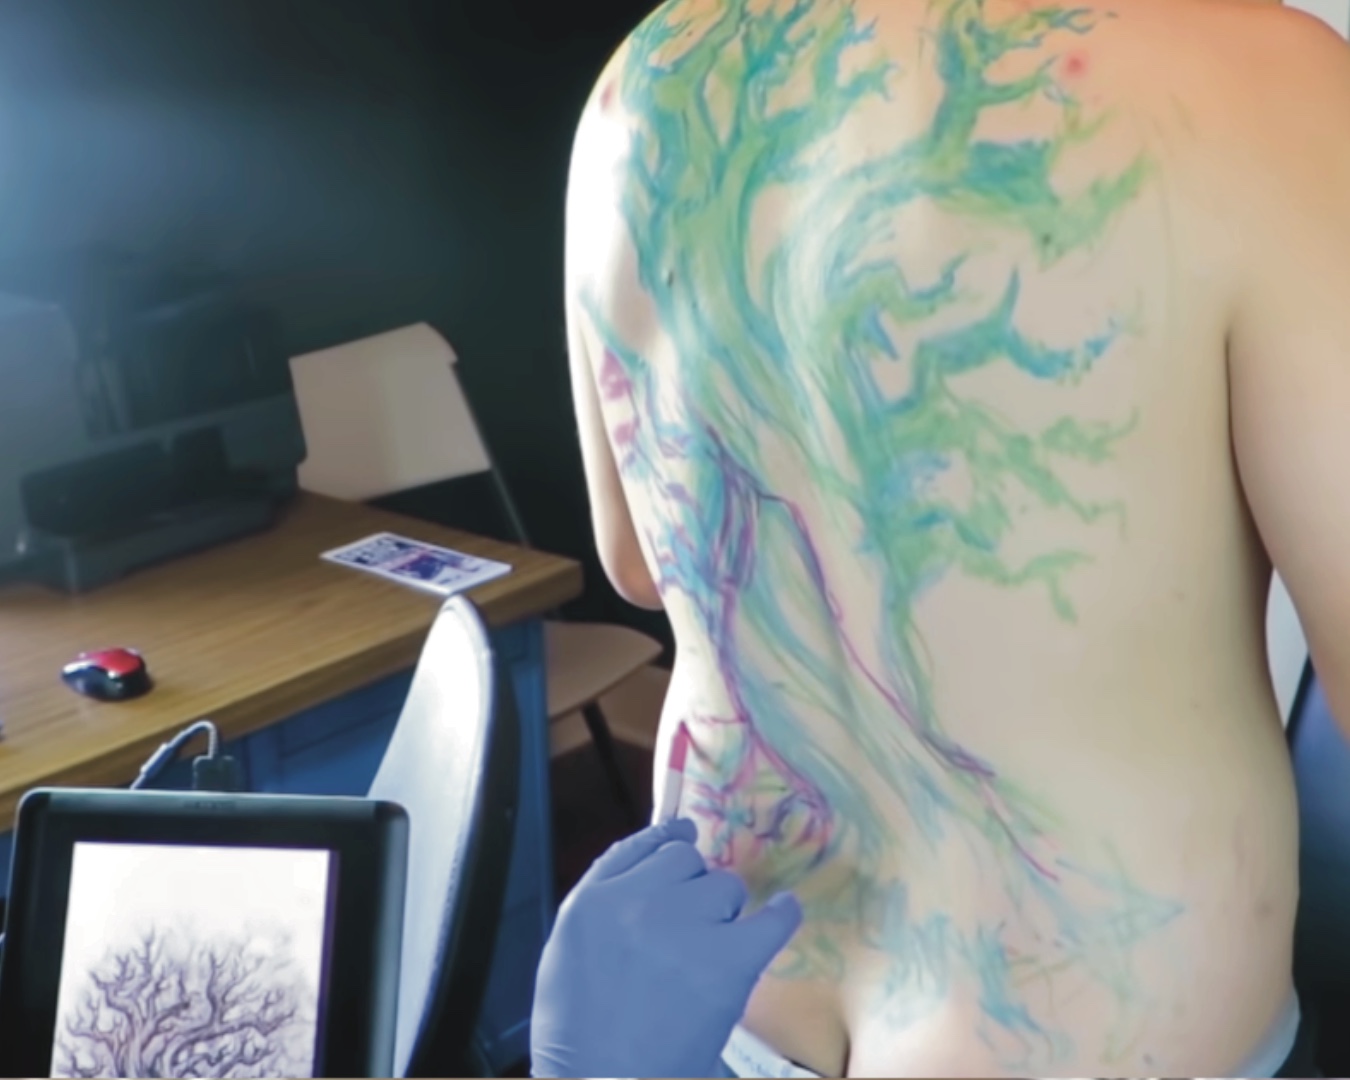 Jake Meeks sculpting a marker drawing of a tree on the client's back